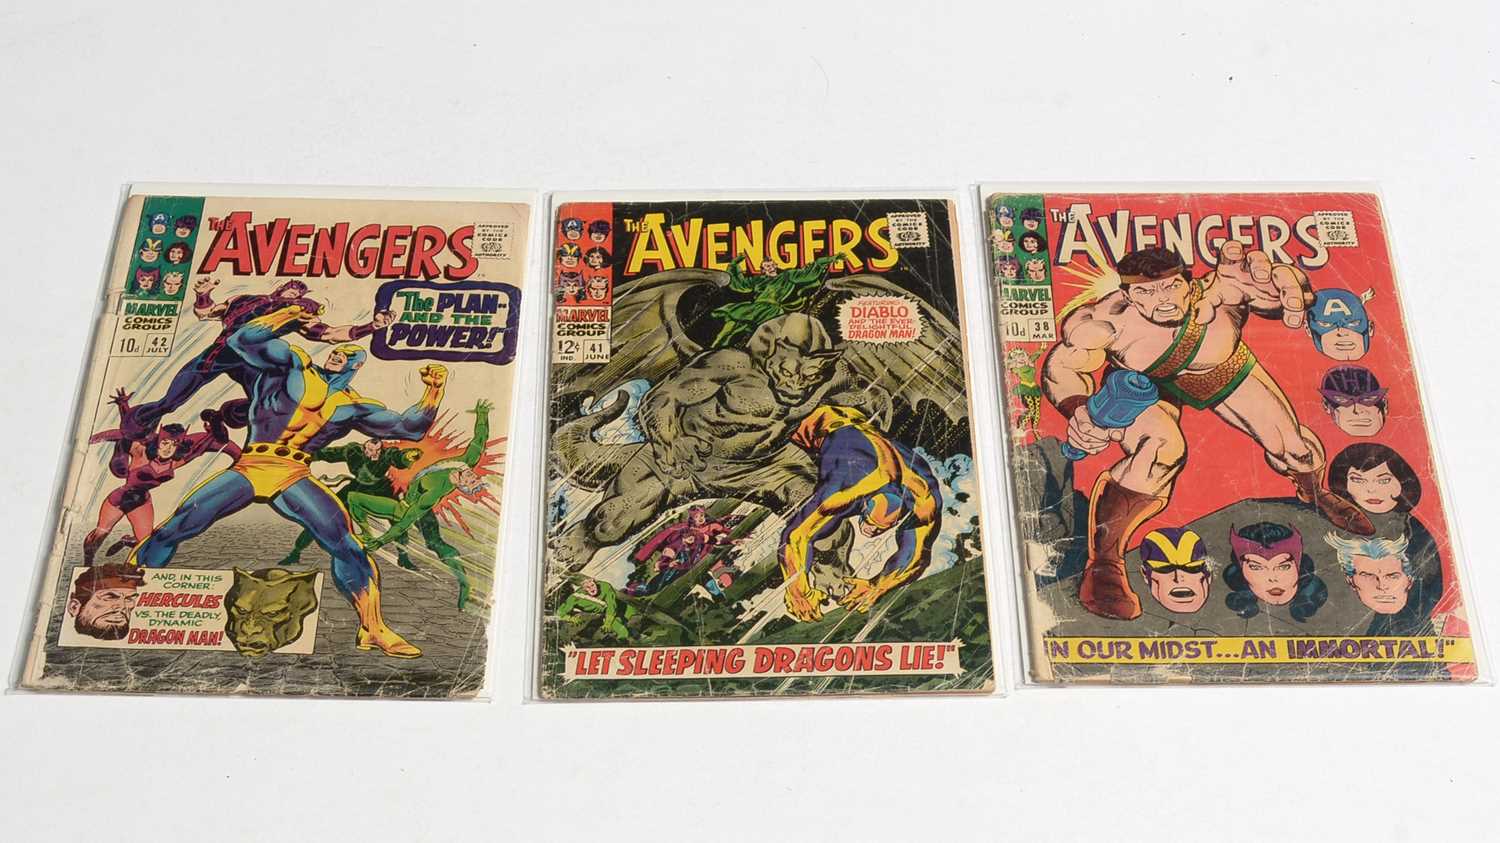 The Avengers by Marvel Comics - Image 2 of 3